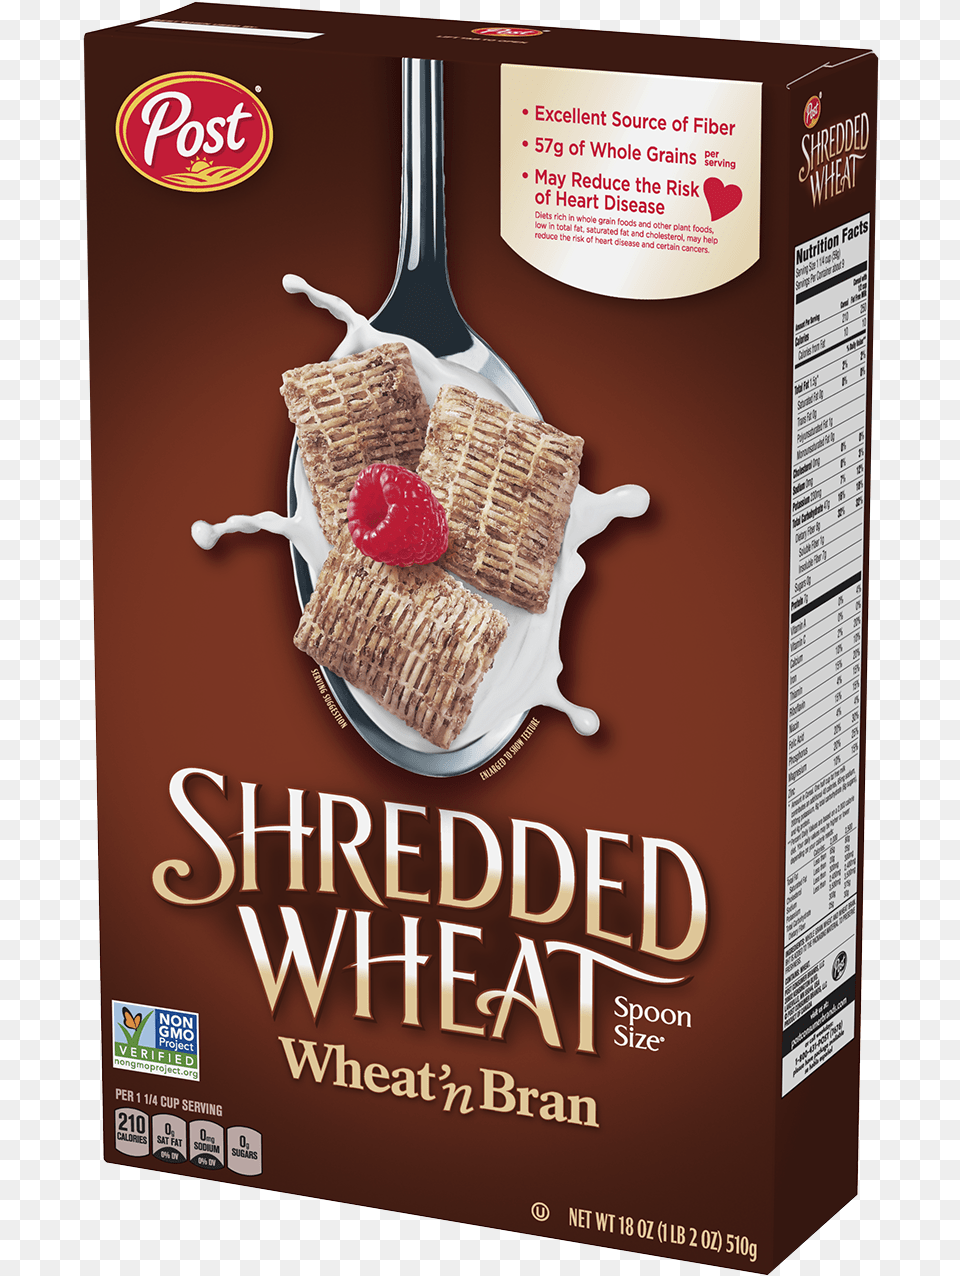 Post Shredded Wheat Spoon Size Wheat39n Bran Cereal Shredded Whole Wheat Cereal, Advertisement, Poster, Cutlery, Food Free Transparent Png